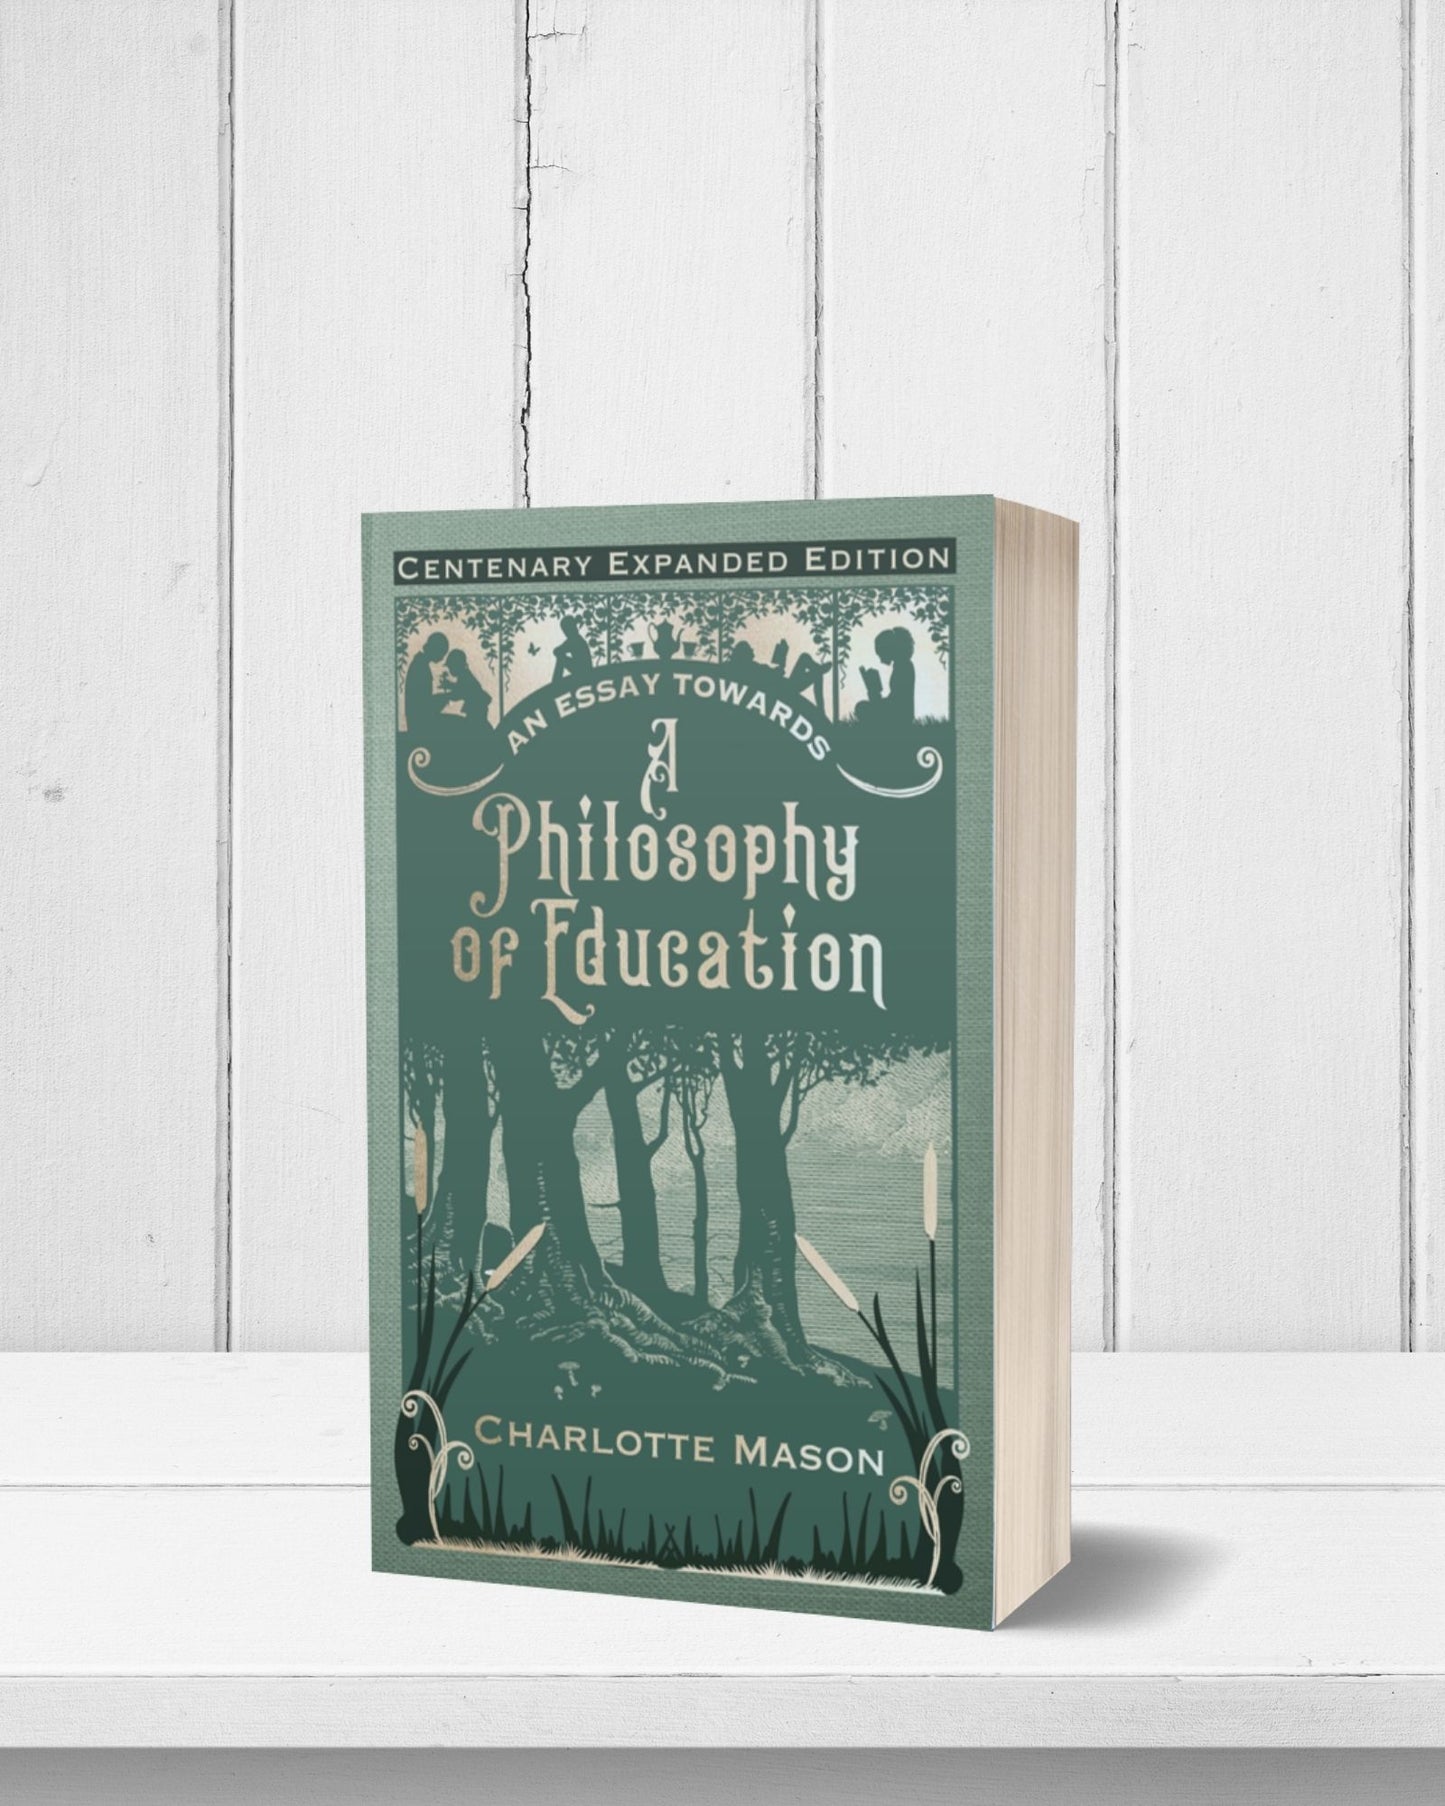 The paperback edition of the sage green book "An Essay Towards a Philosophy of Education" stands on a white shelf in front of white washed walls.